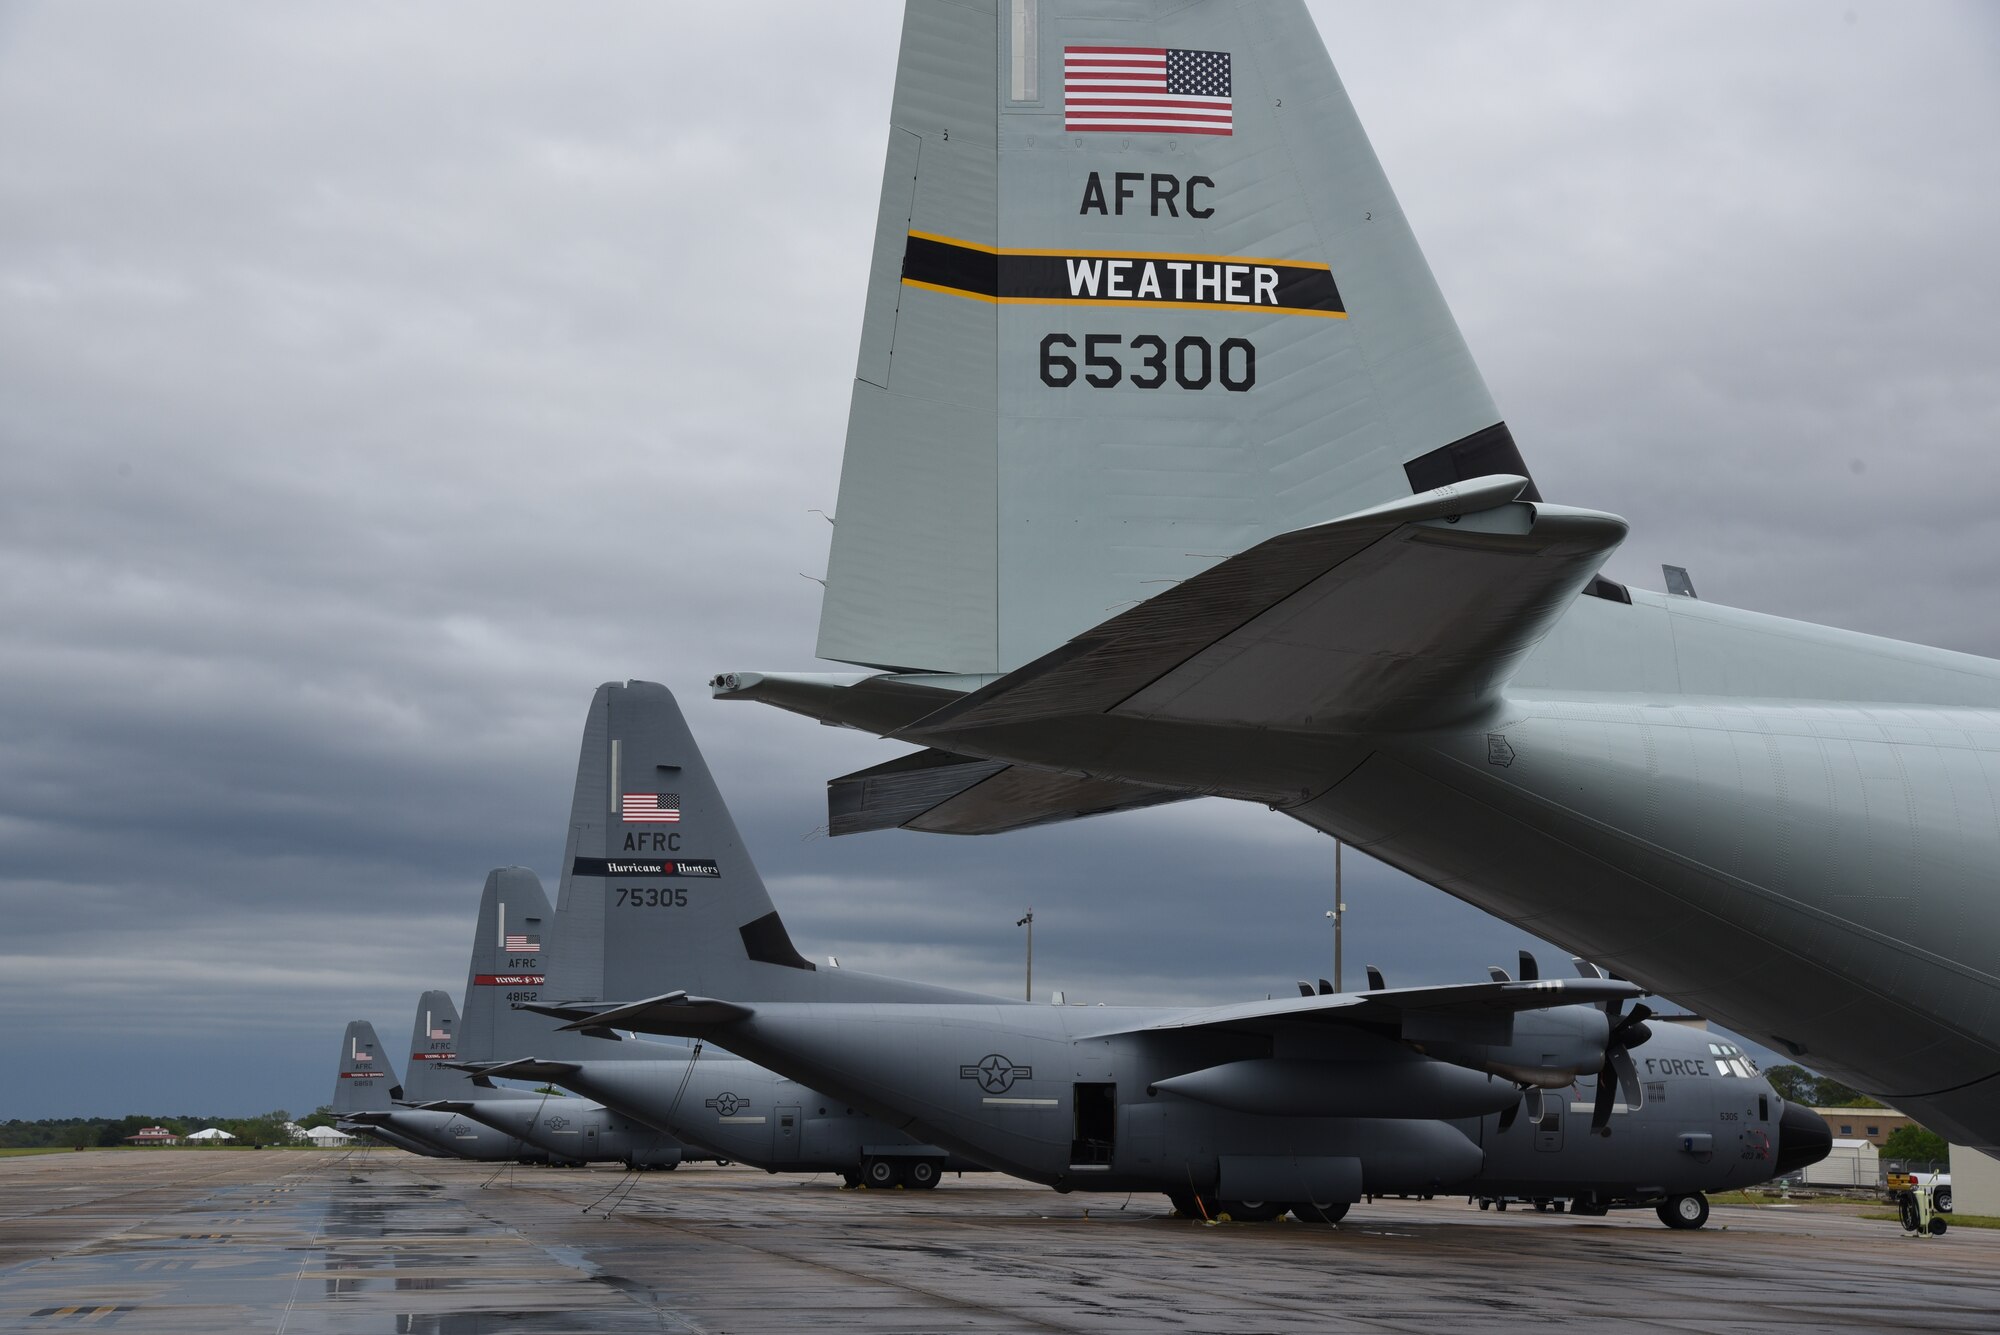 Tail fins of the new shiny gray paint scheme with vintage 'Weather' tail marking on WC-130J next to tactical gray version.